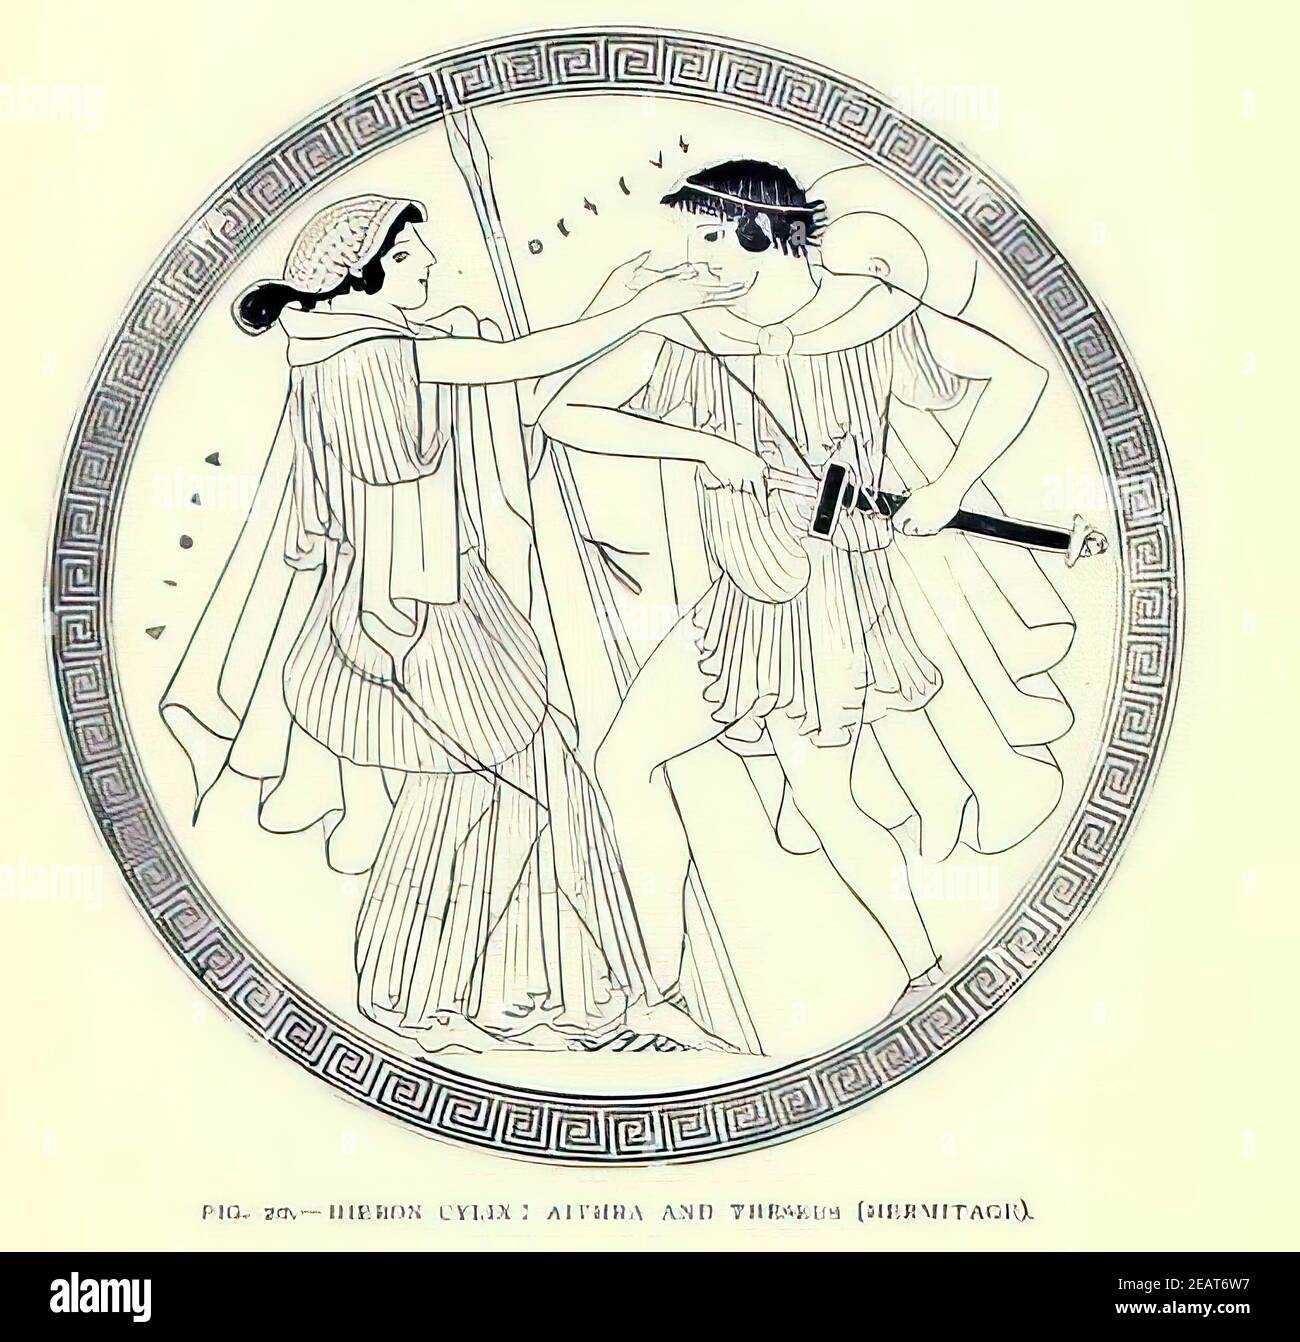 Illustration of Aethra (a character in Greek mythology) with her son Theseus, taking out his sword Stock Photo